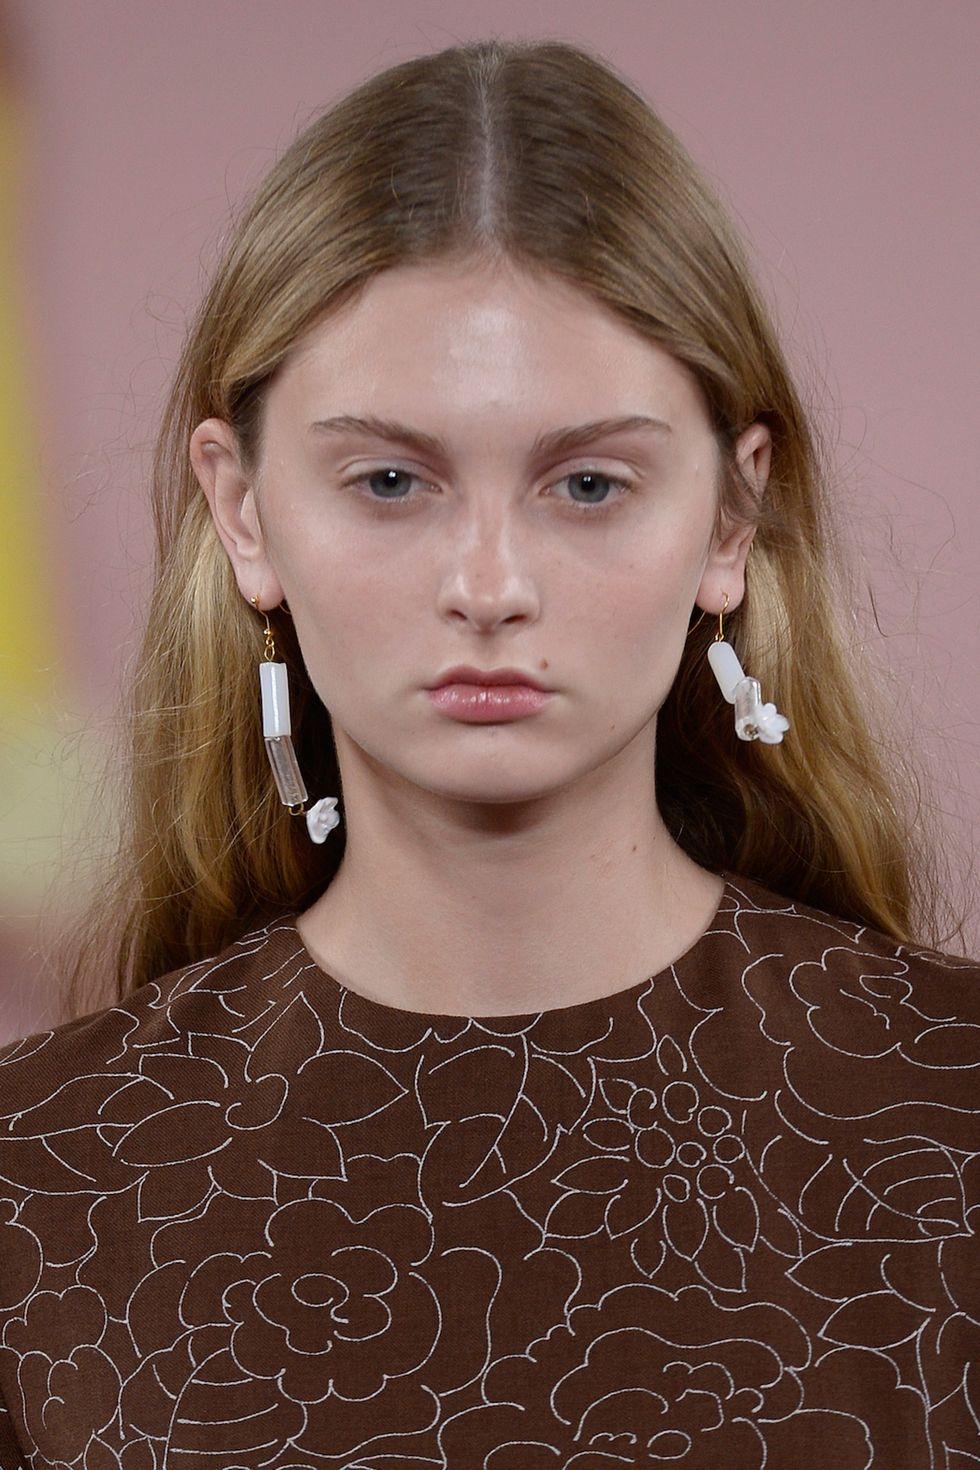 'No make-up' make-up leads the fashion week beauty trends for spring ...